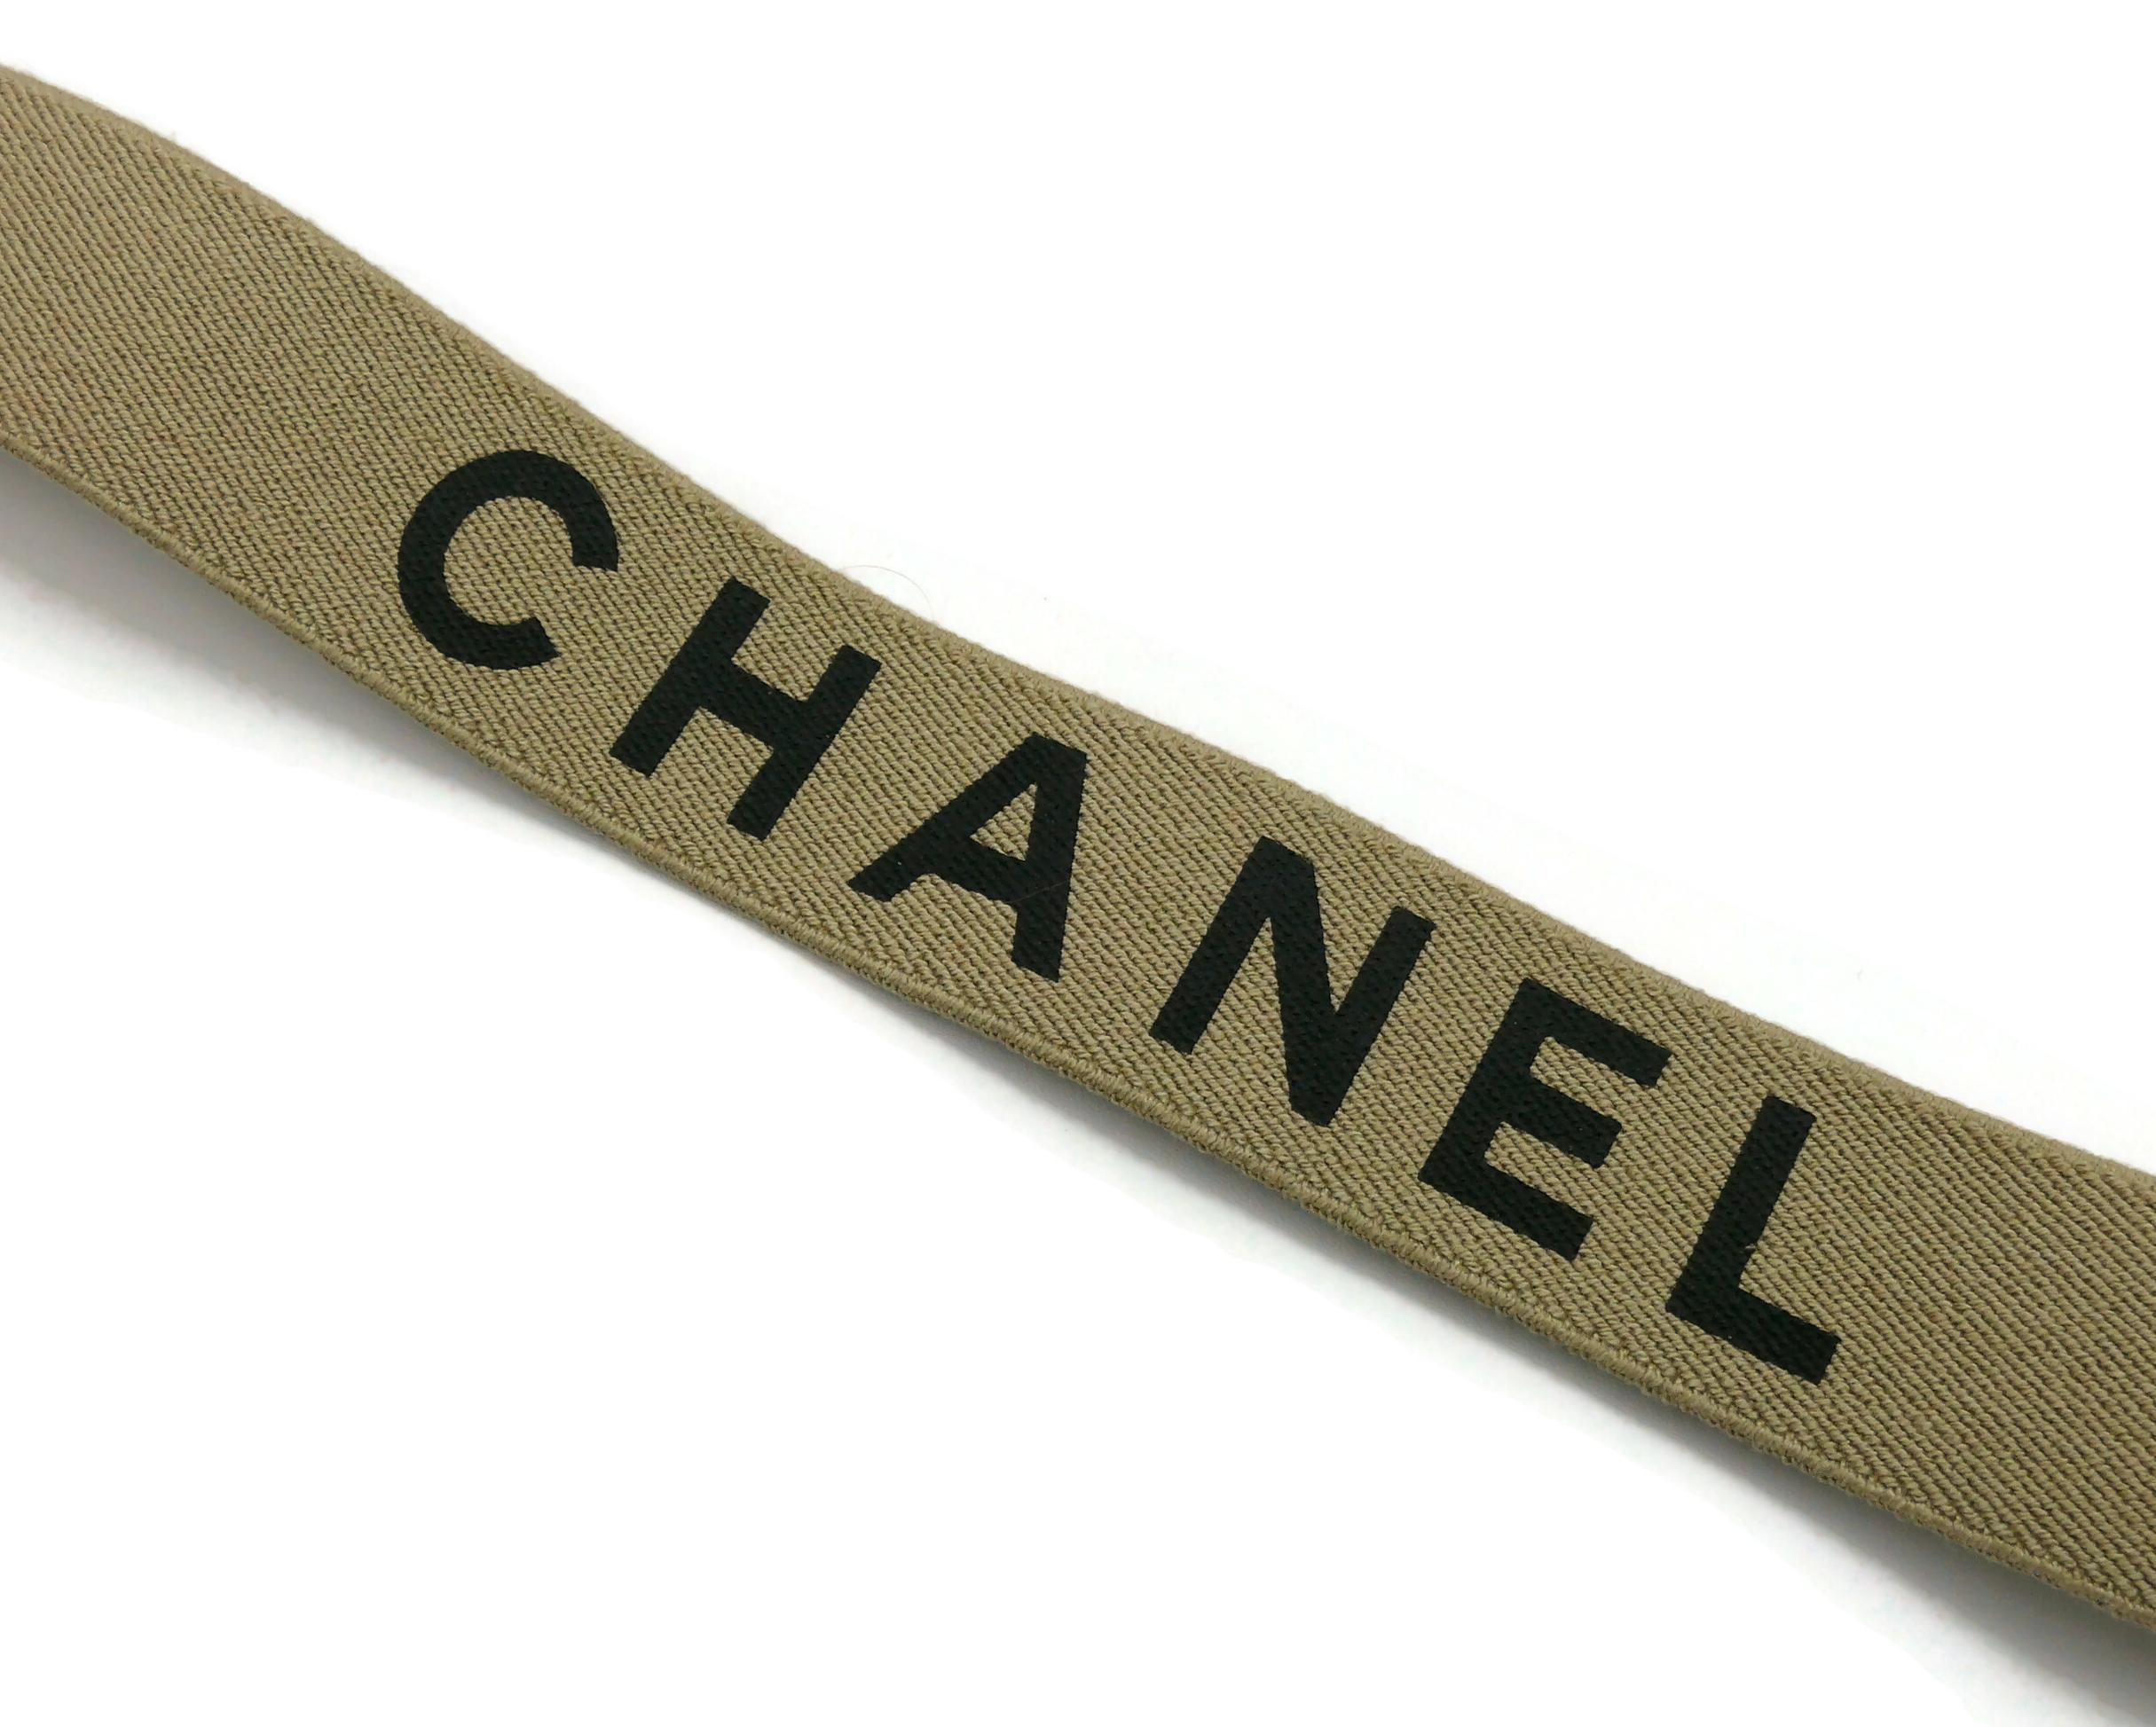 CHANEL by KARL LAGERFELD Vintage Iconic Light Brown and Black Suspenders, 1994 For Sale 1